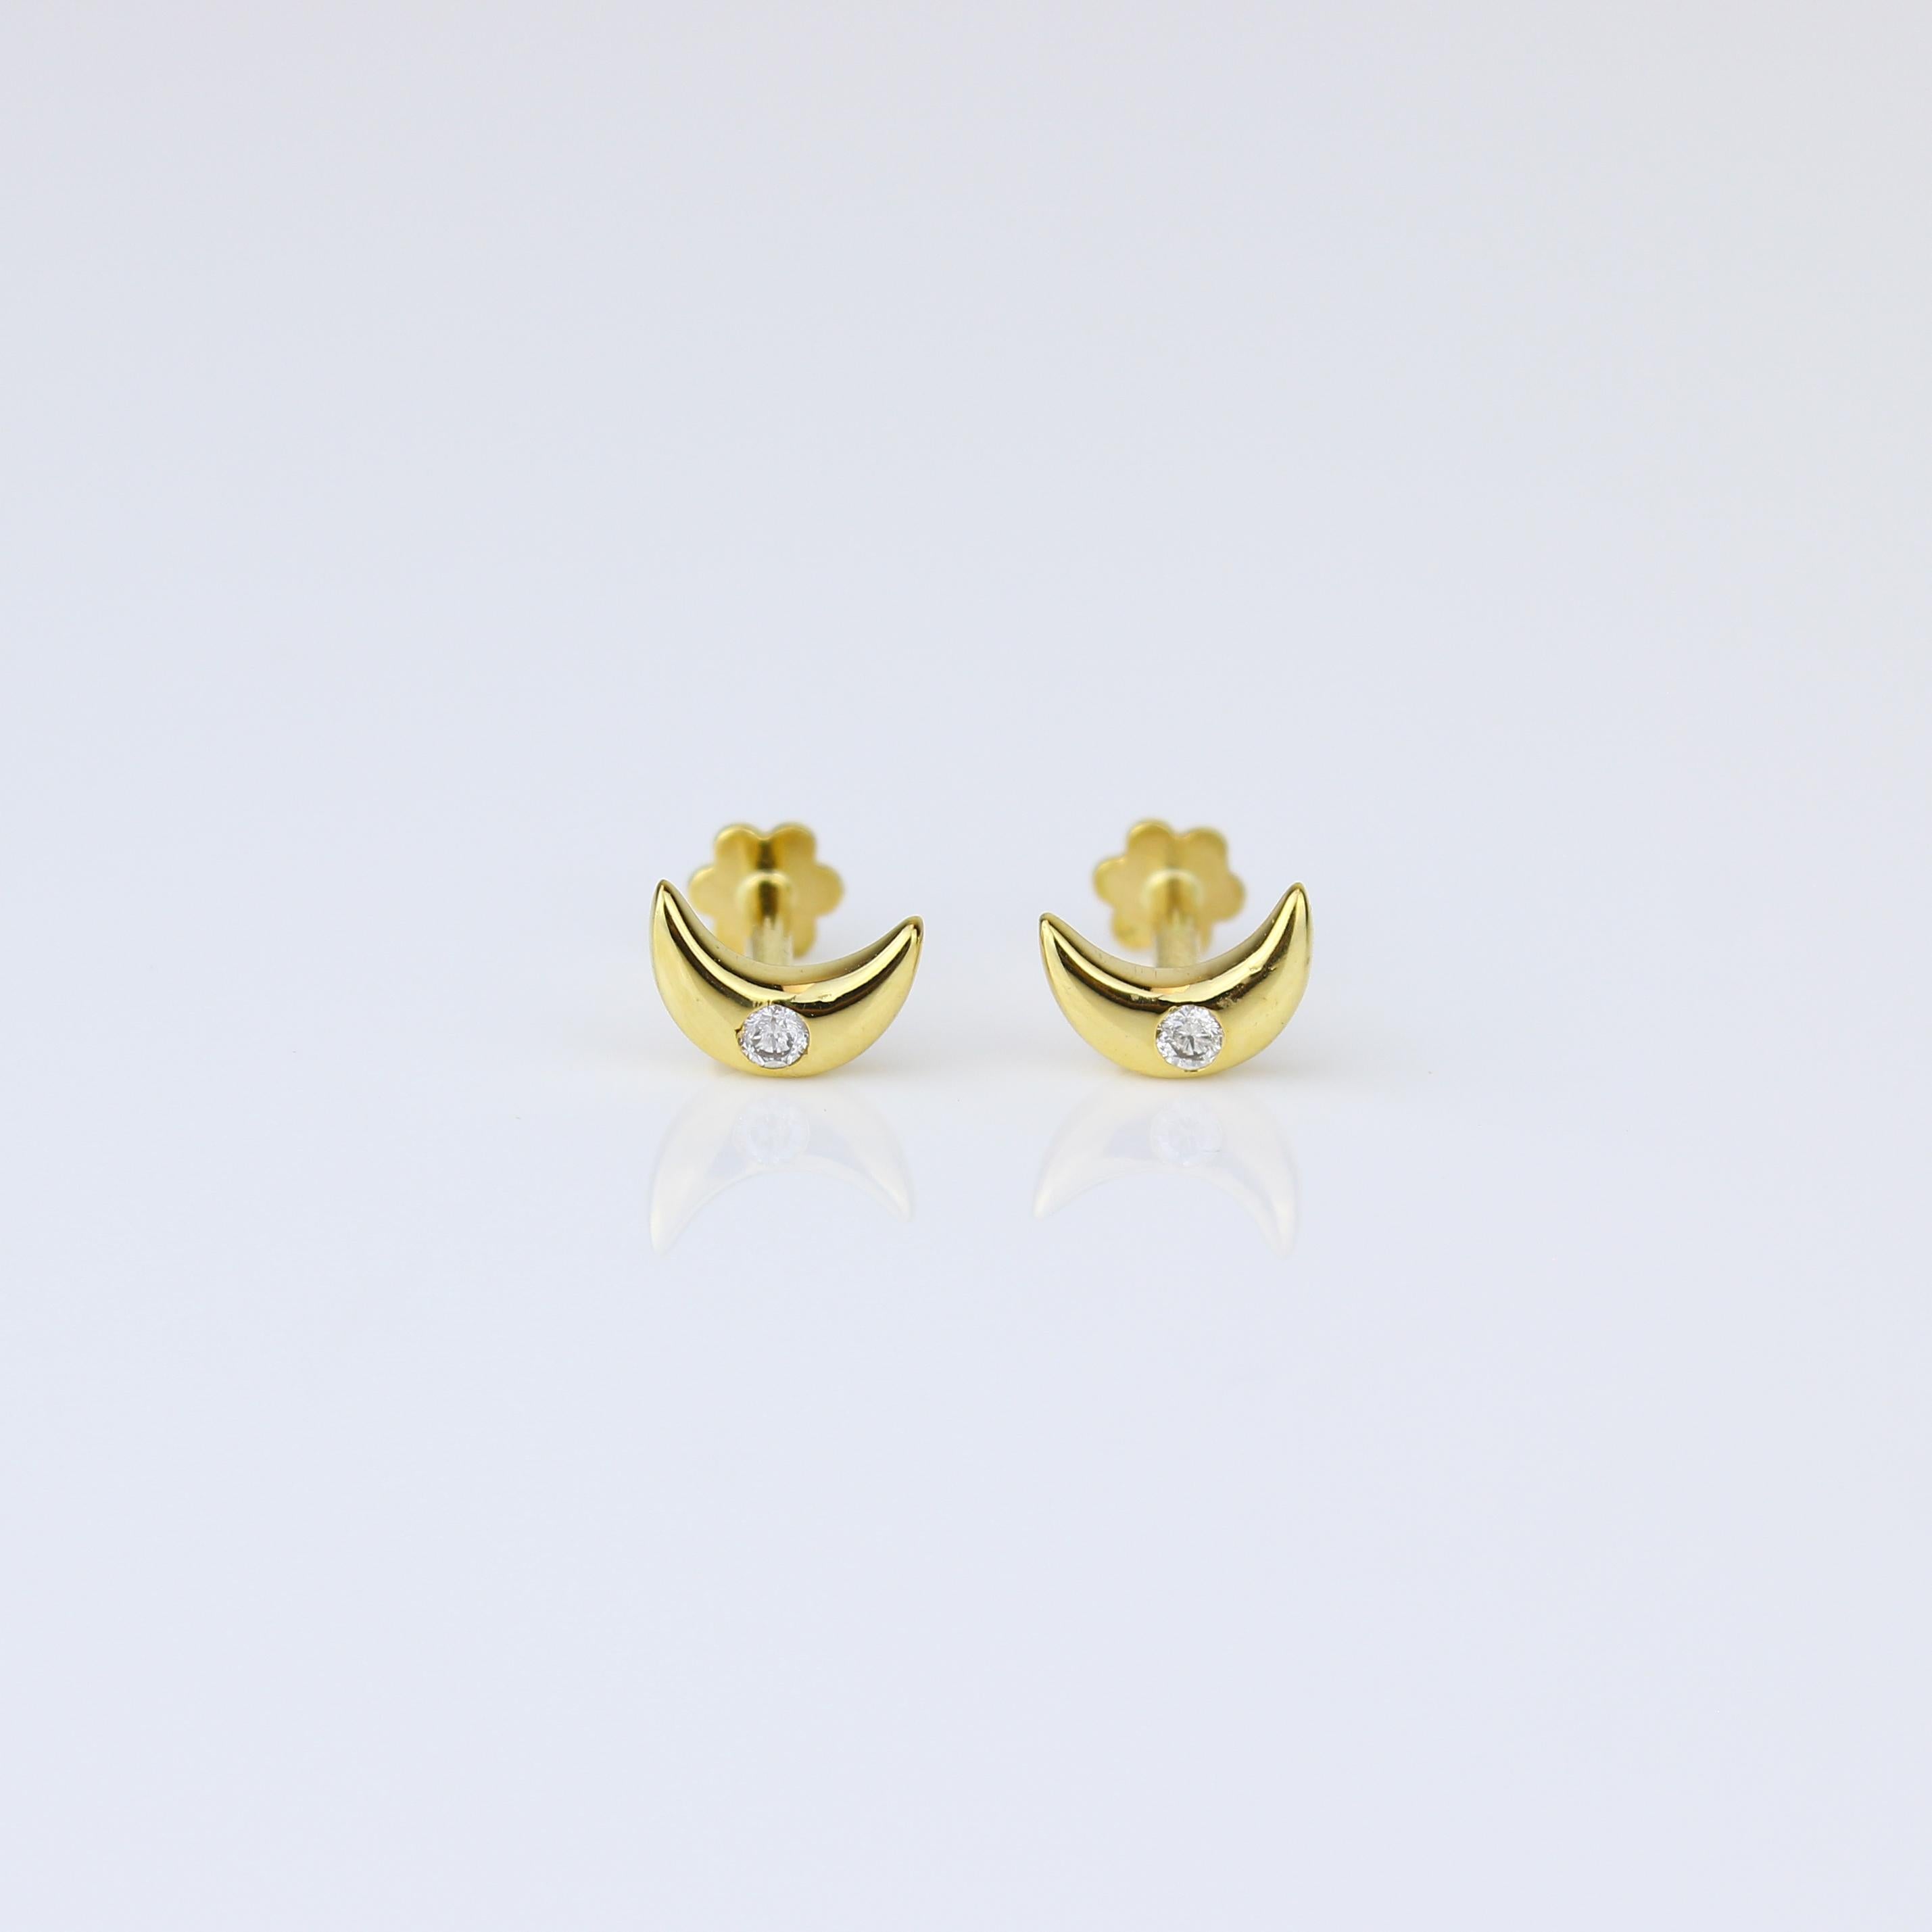 Elegant Crescent Moon Diamond Earrings specially crafted for Girls (Kids/Toddlers) in opulent 18K Solid Gold. These captivating earrings feature graceful crescent moon designs adorned with delicate diamonds, adding a touch of celestial charm to your